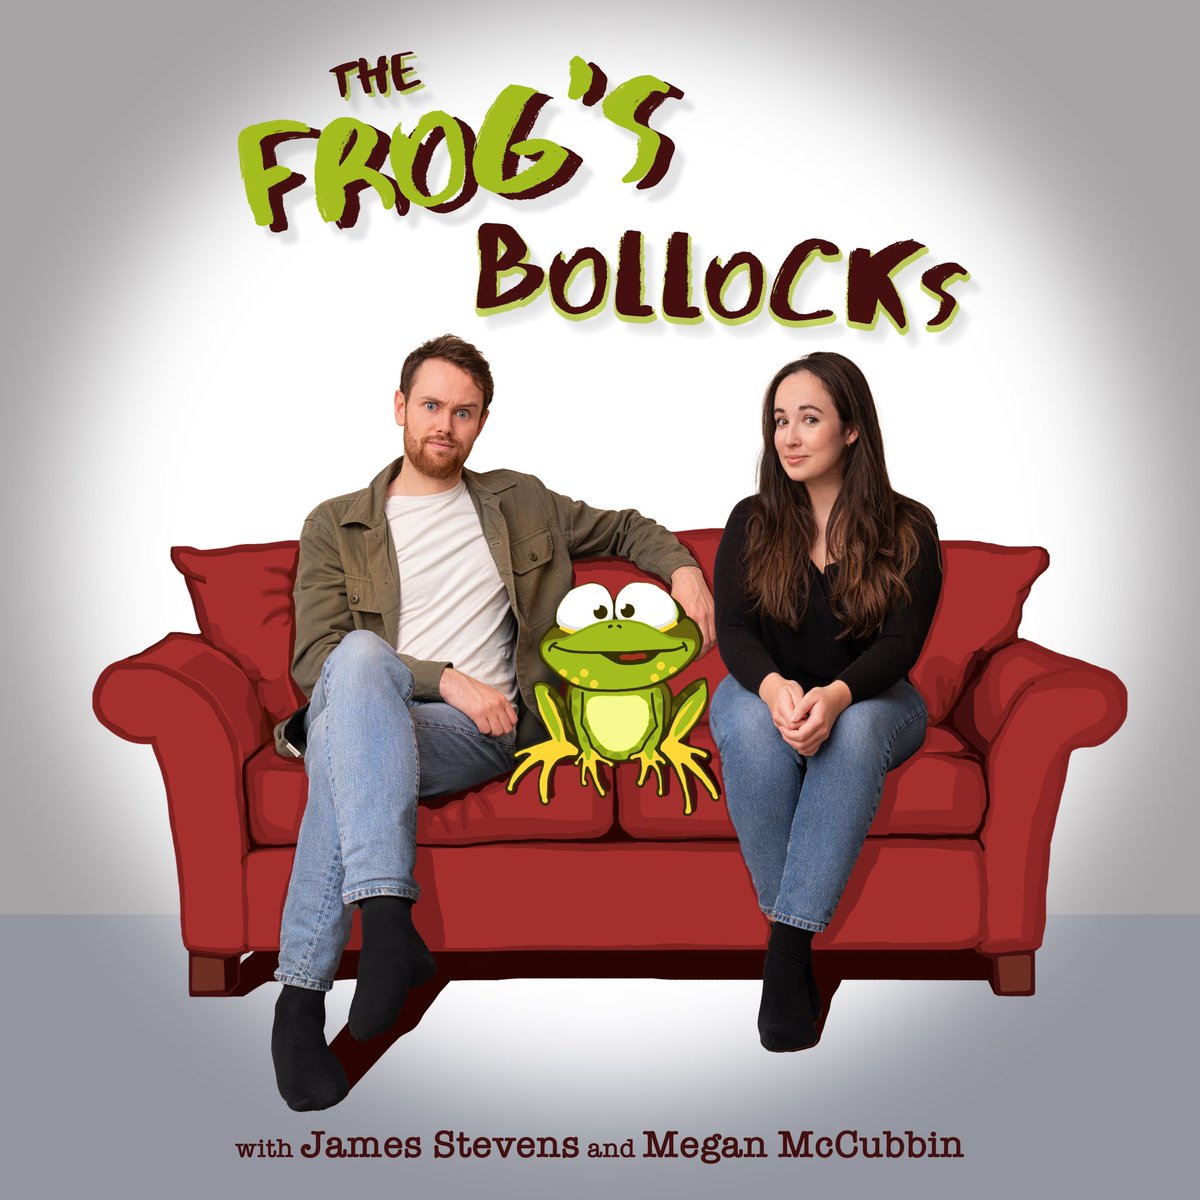 We’re set for recording episode 3 of the #TheFrogsBollocks podcast and we want your questions and stories! Send them on social media or email us info@thefrogsbollocks.com @MeganMcCubbin